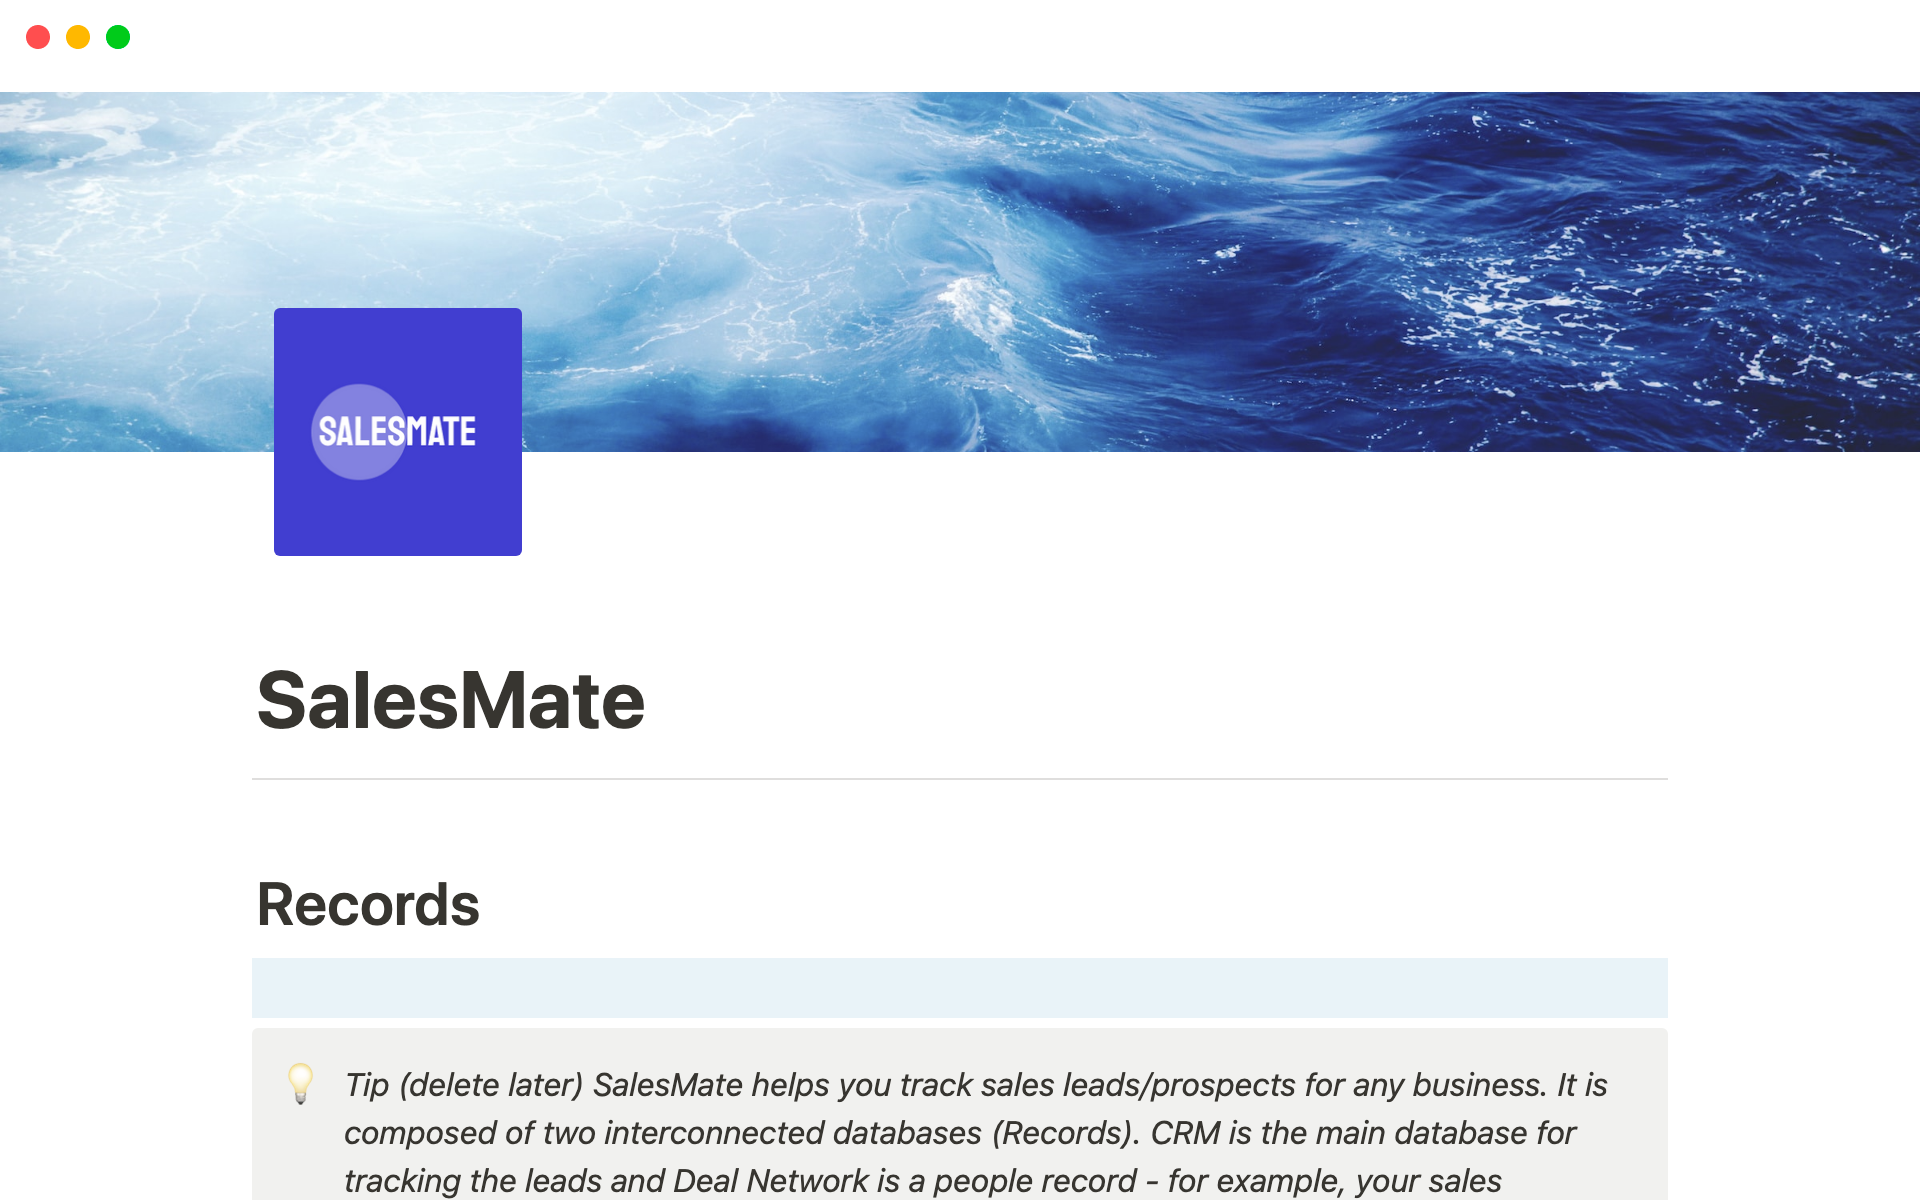 SalesMate is sales lead management CRM for any small businesses